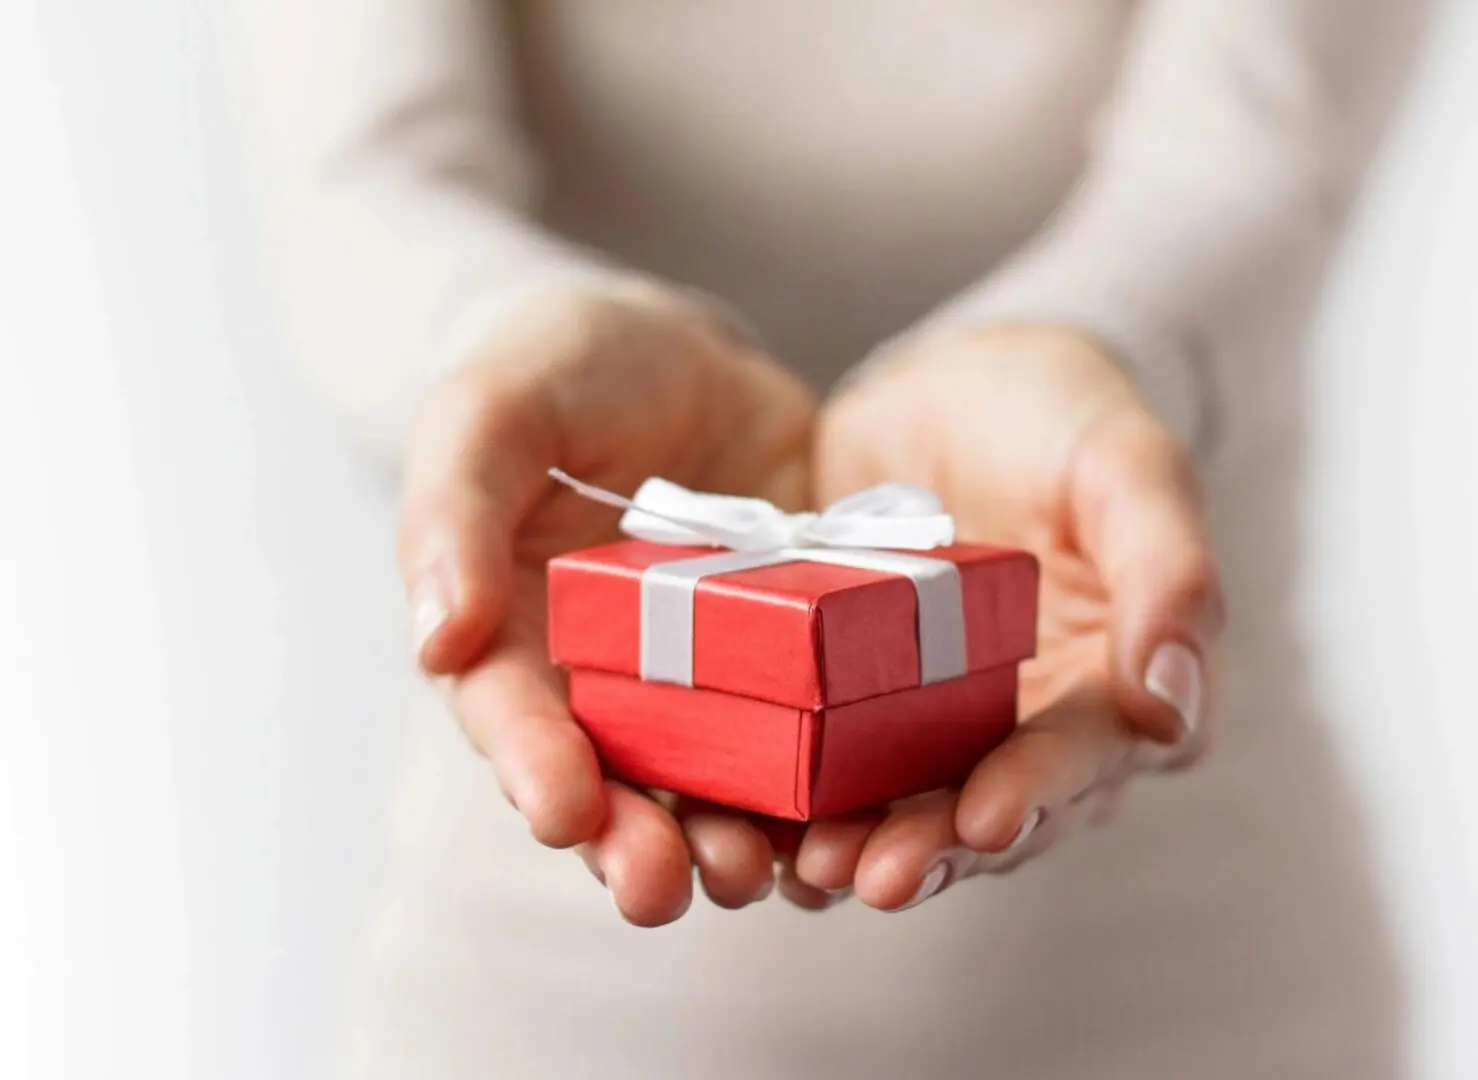 A person holding a small red gift box.